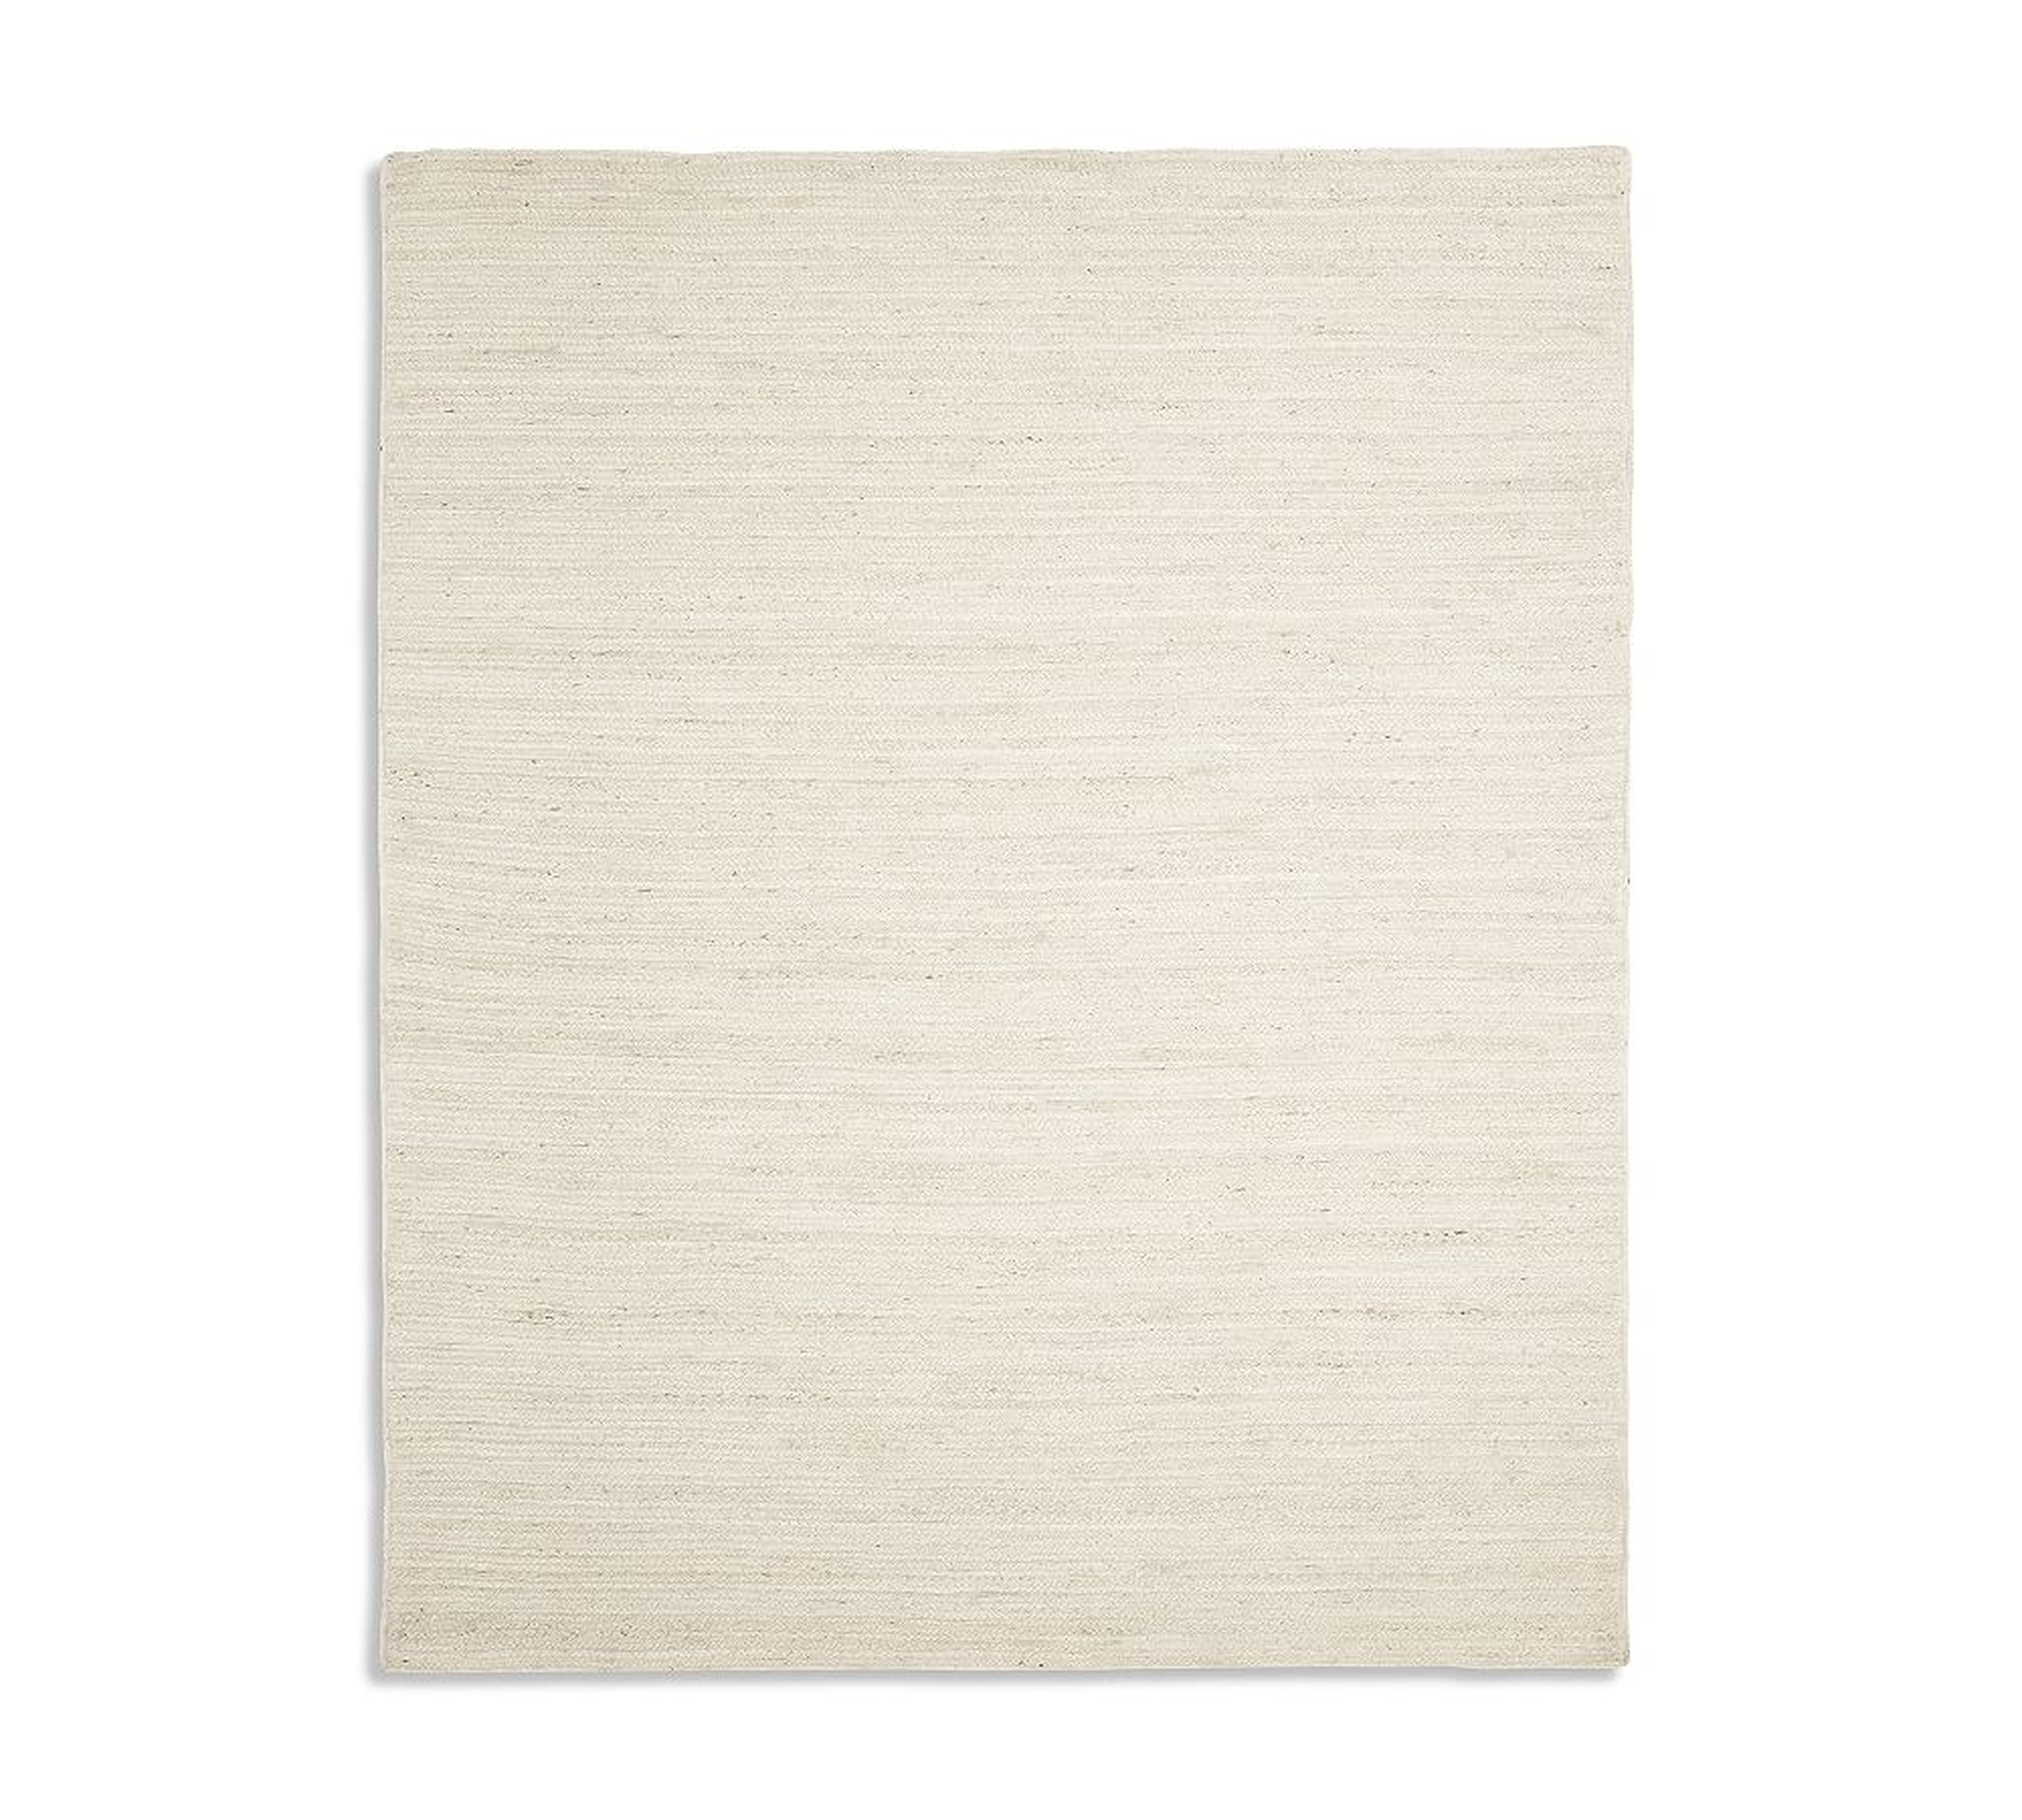 Haven Braided Natural Fiber Rug , 8 x 10', Ivory - Pottery Barn